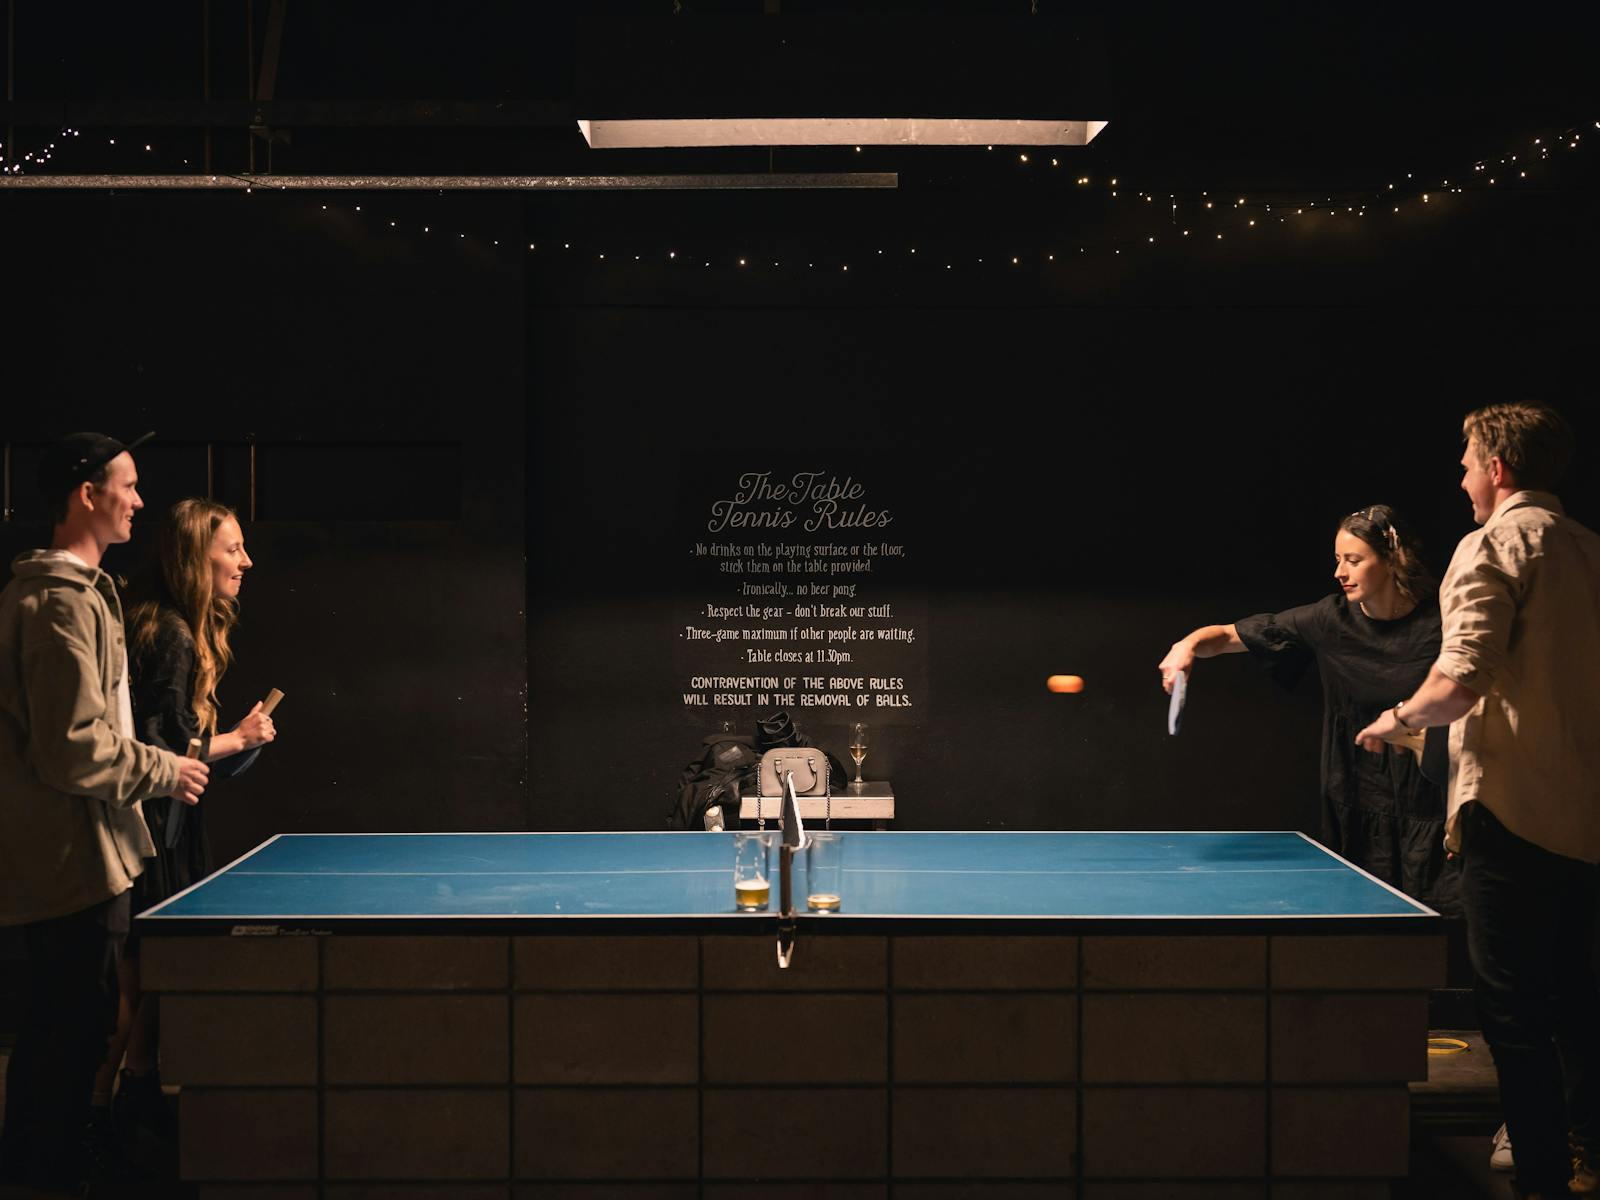 two couples playing table tennis